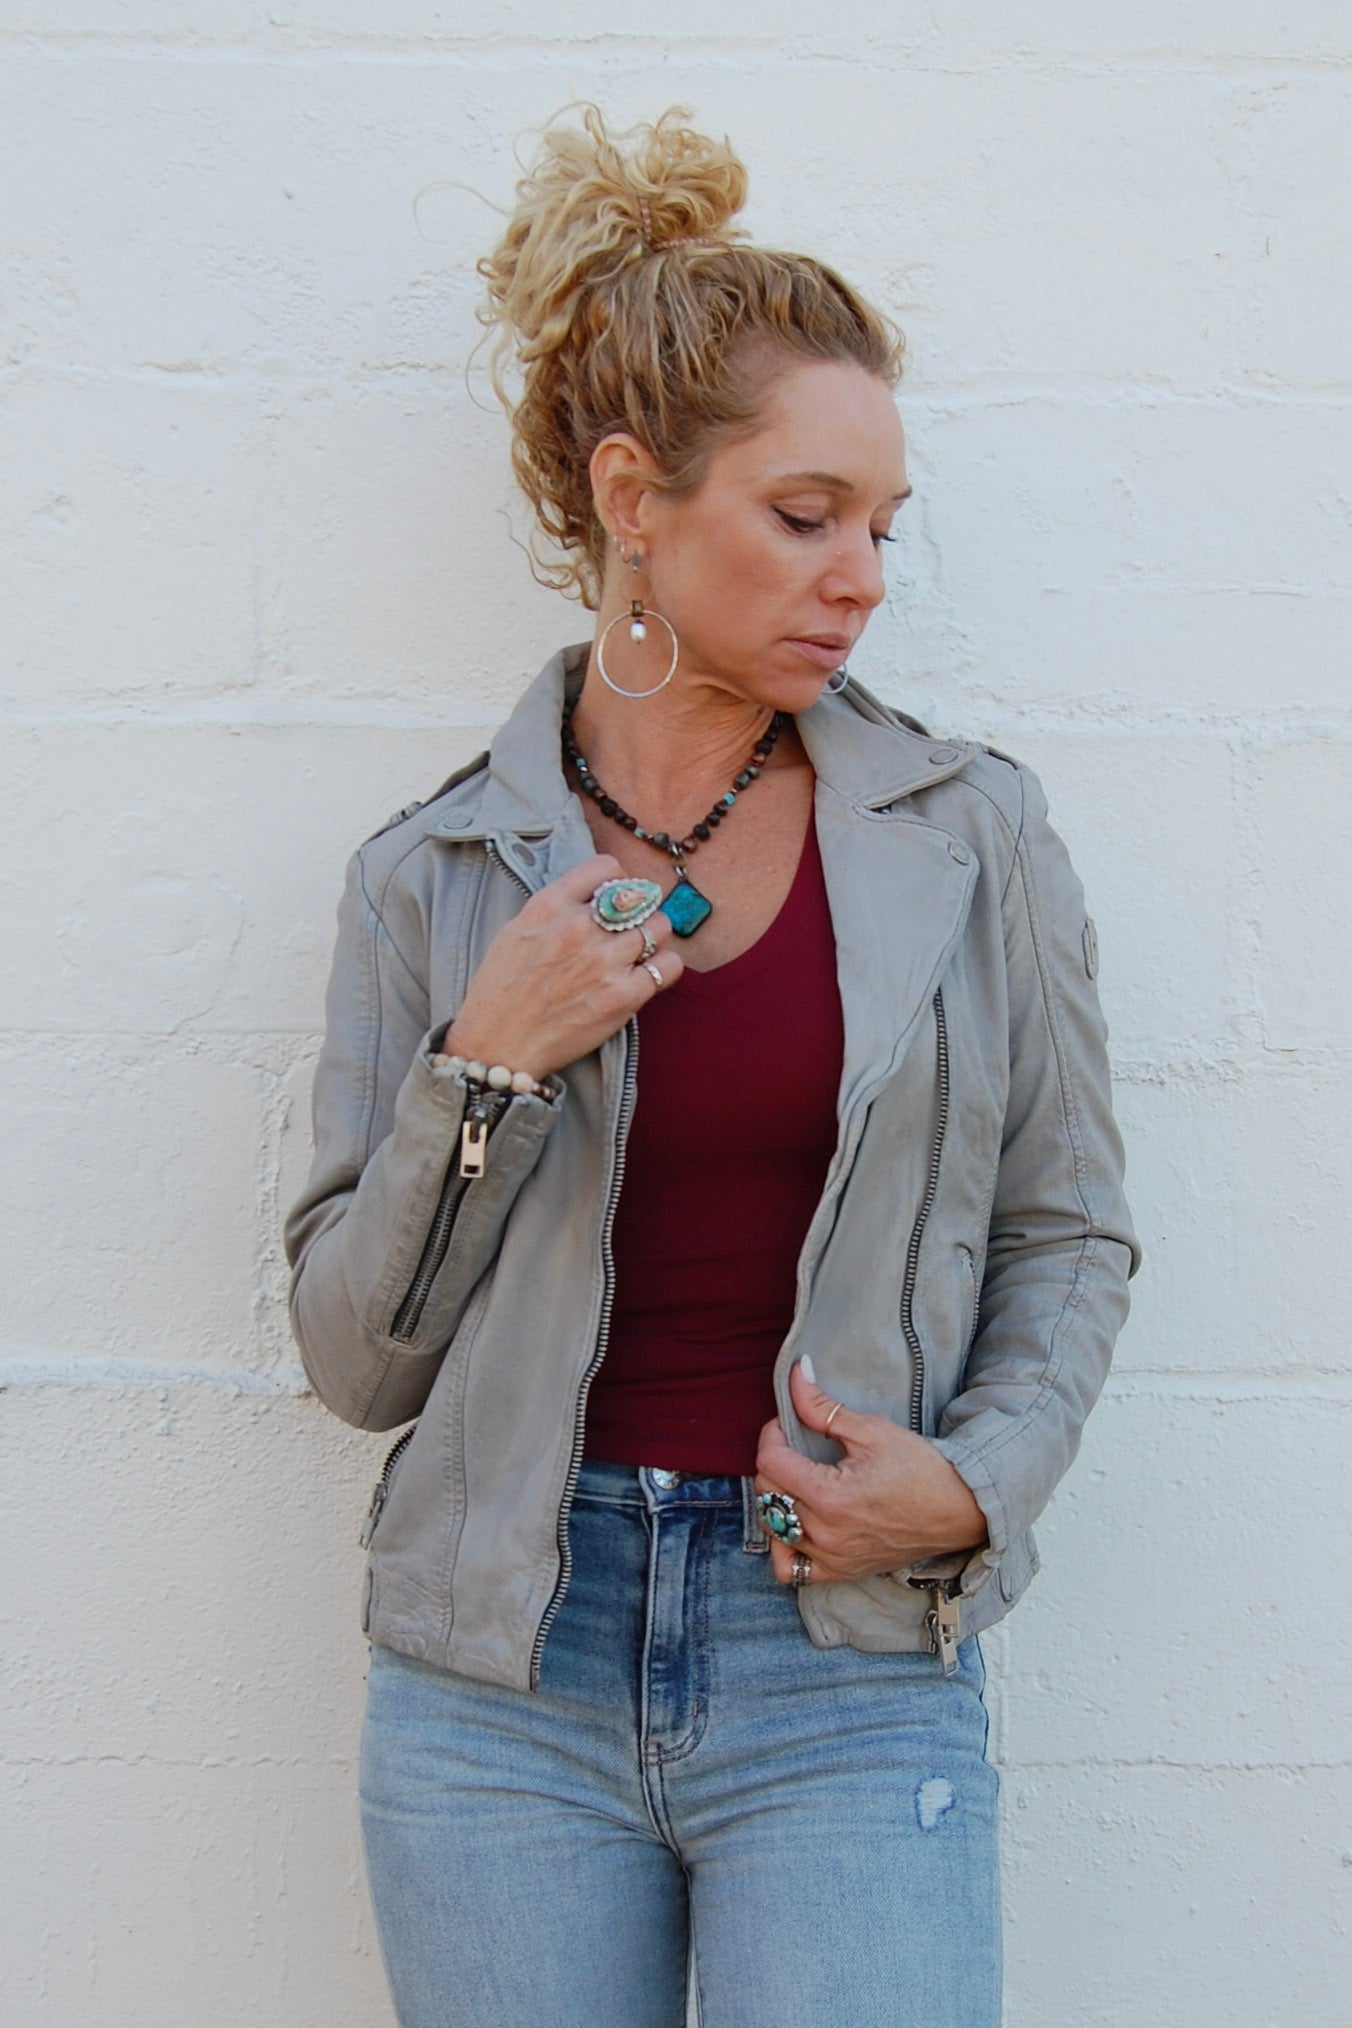 Load image into Gallery viewer, Narin RF Leather Jacket in Light Grey - SpiritedBoutiques Boho Hippie Boutique Style Jacket, Mauritius
